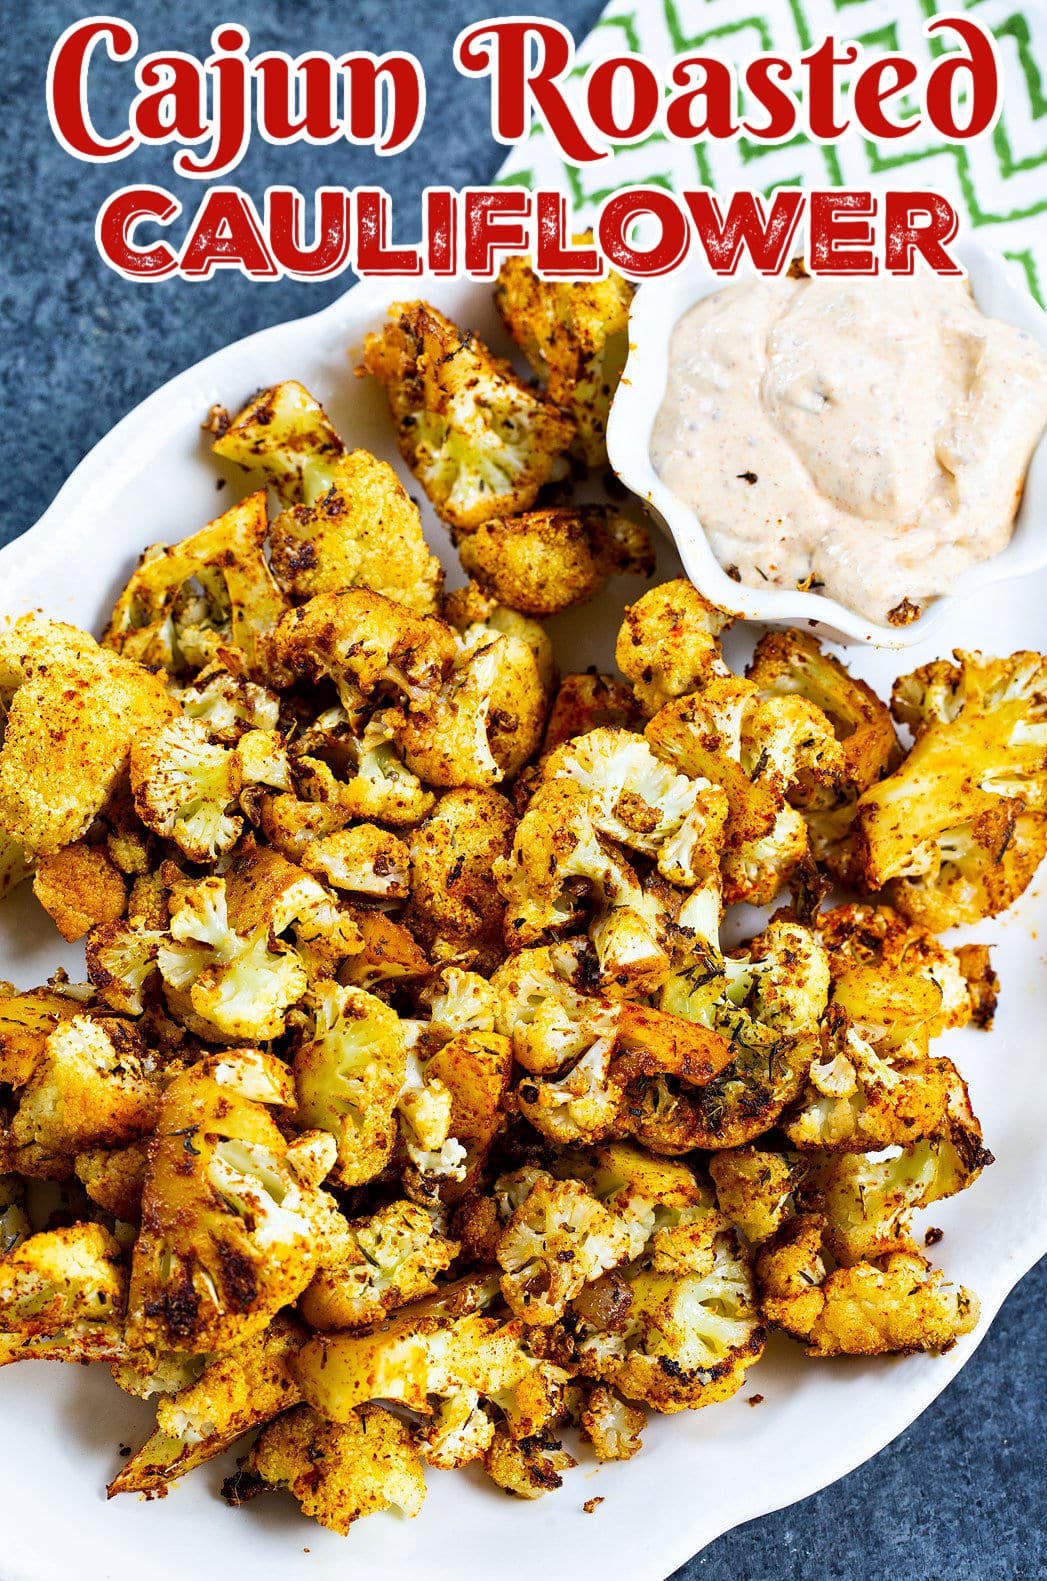 Cajun Roasted Cauliflower on a serving plate with remoulade sauce.